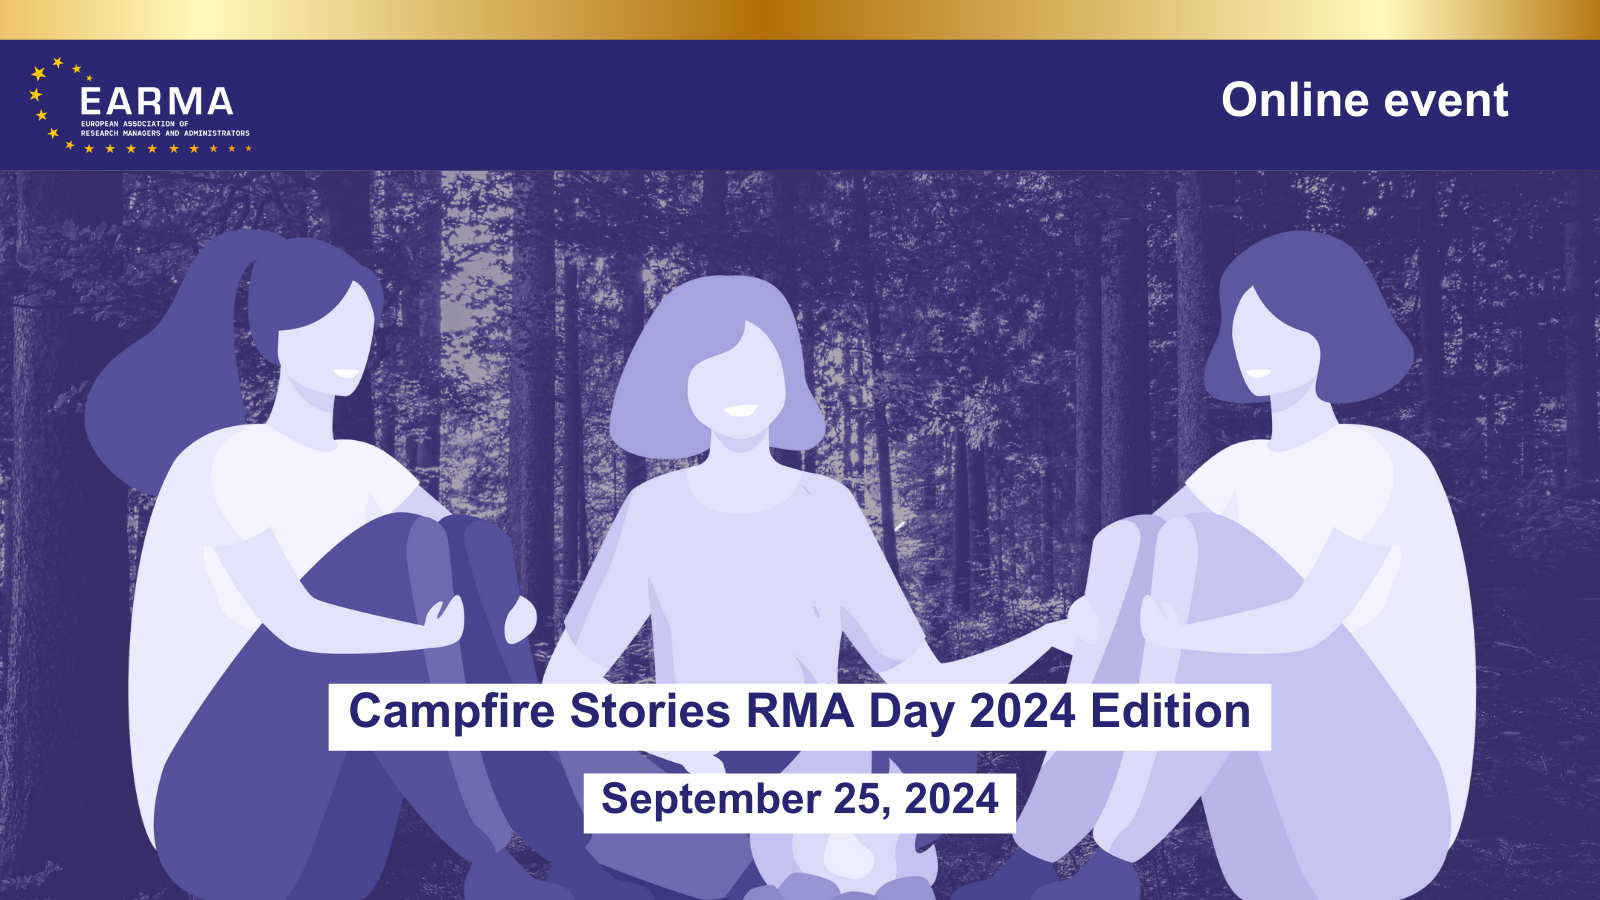 Campfire Stories RMA Day 2024 Edition